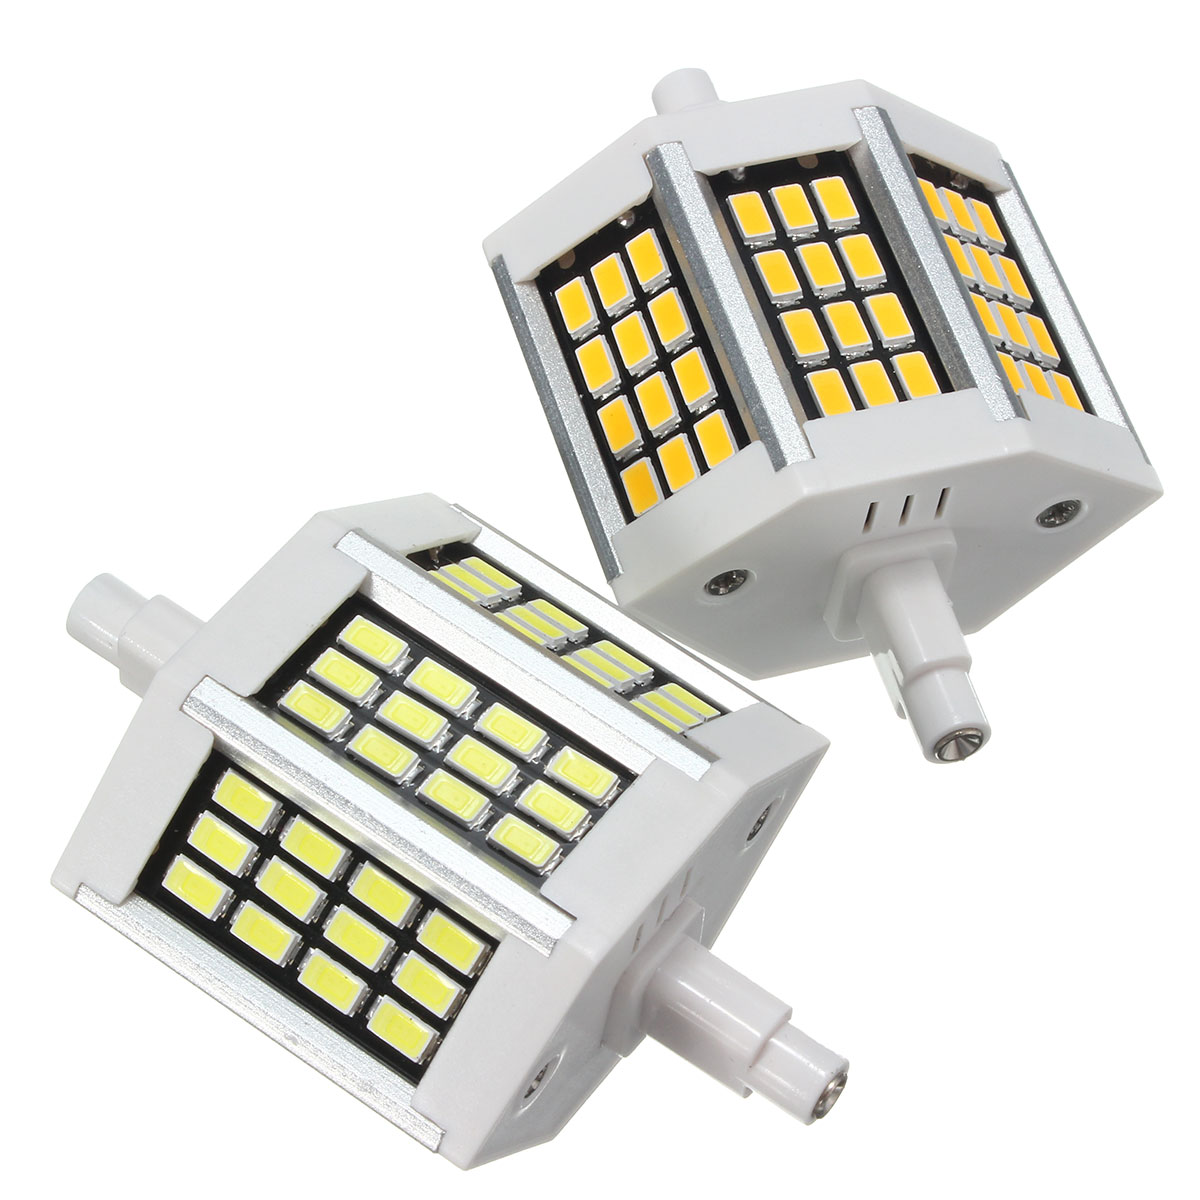 78MM-Non-dimmable-R7S-SMD5733-Warm-White-Pure-White-36-LED-Light-Bulb-AC110V-AC220V-1430529-2